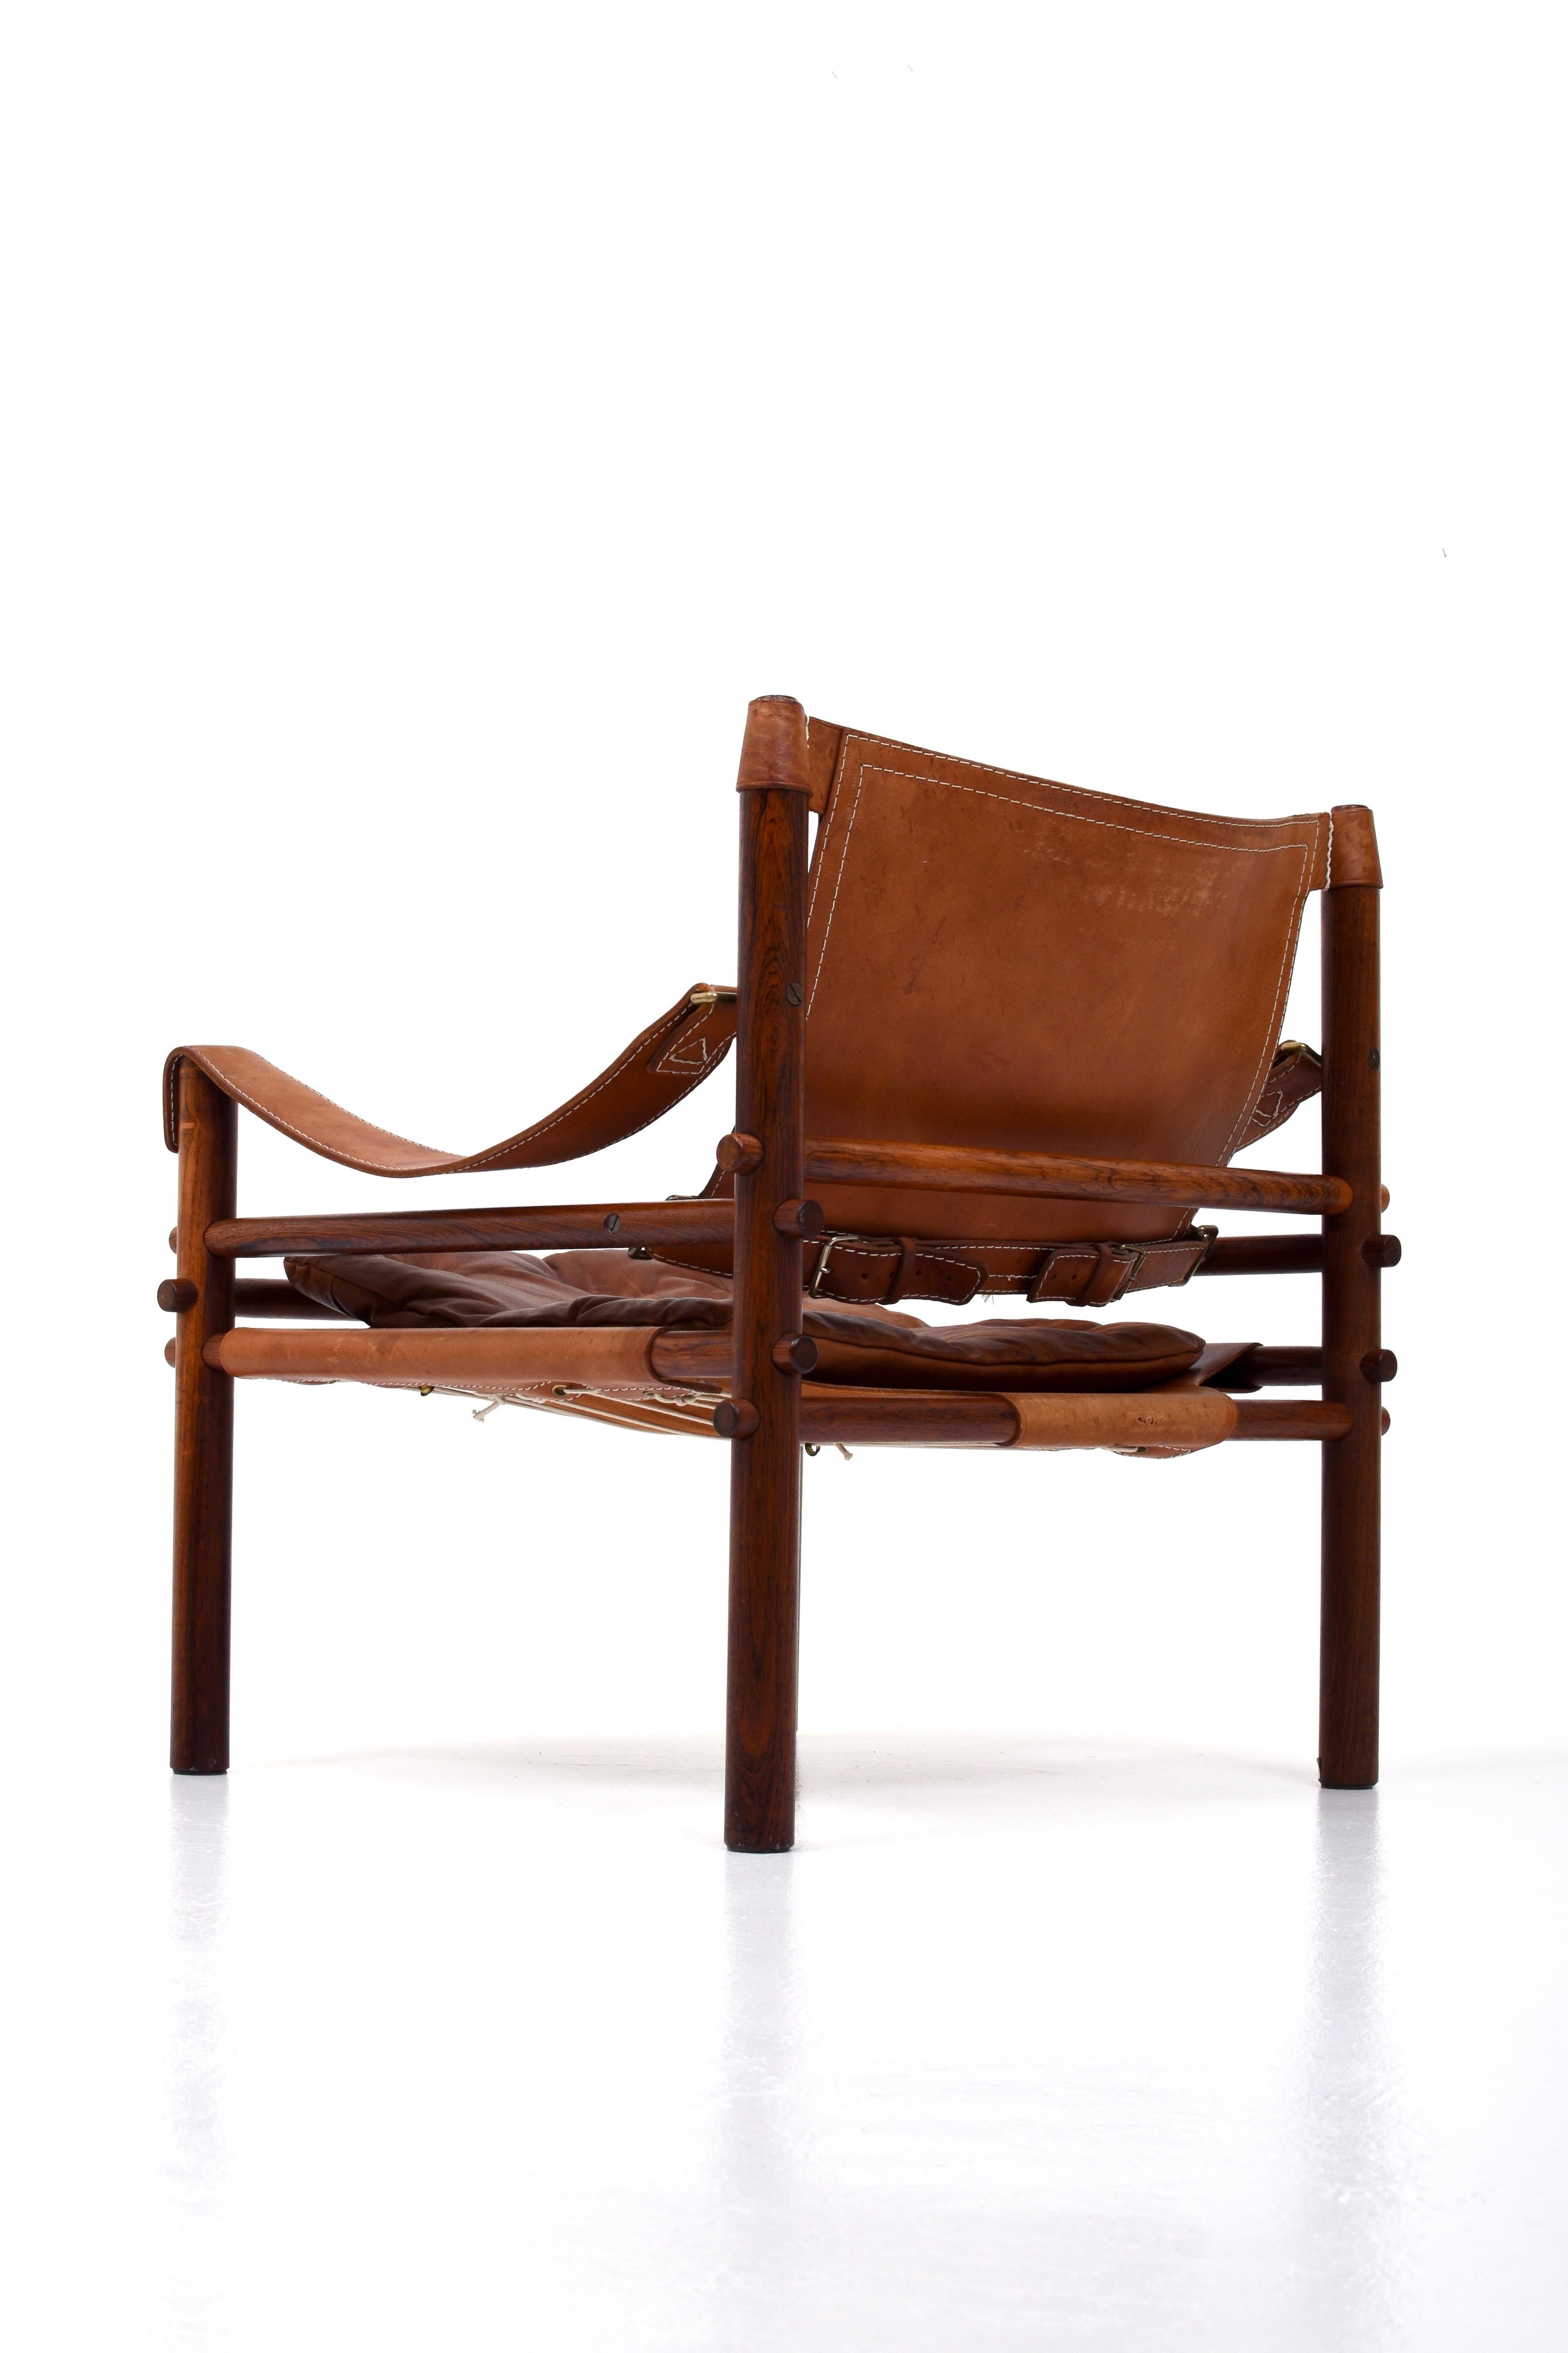 Mid-20th Century Leather Sirocco Armchair by Arne Norell, 1960s For Sale